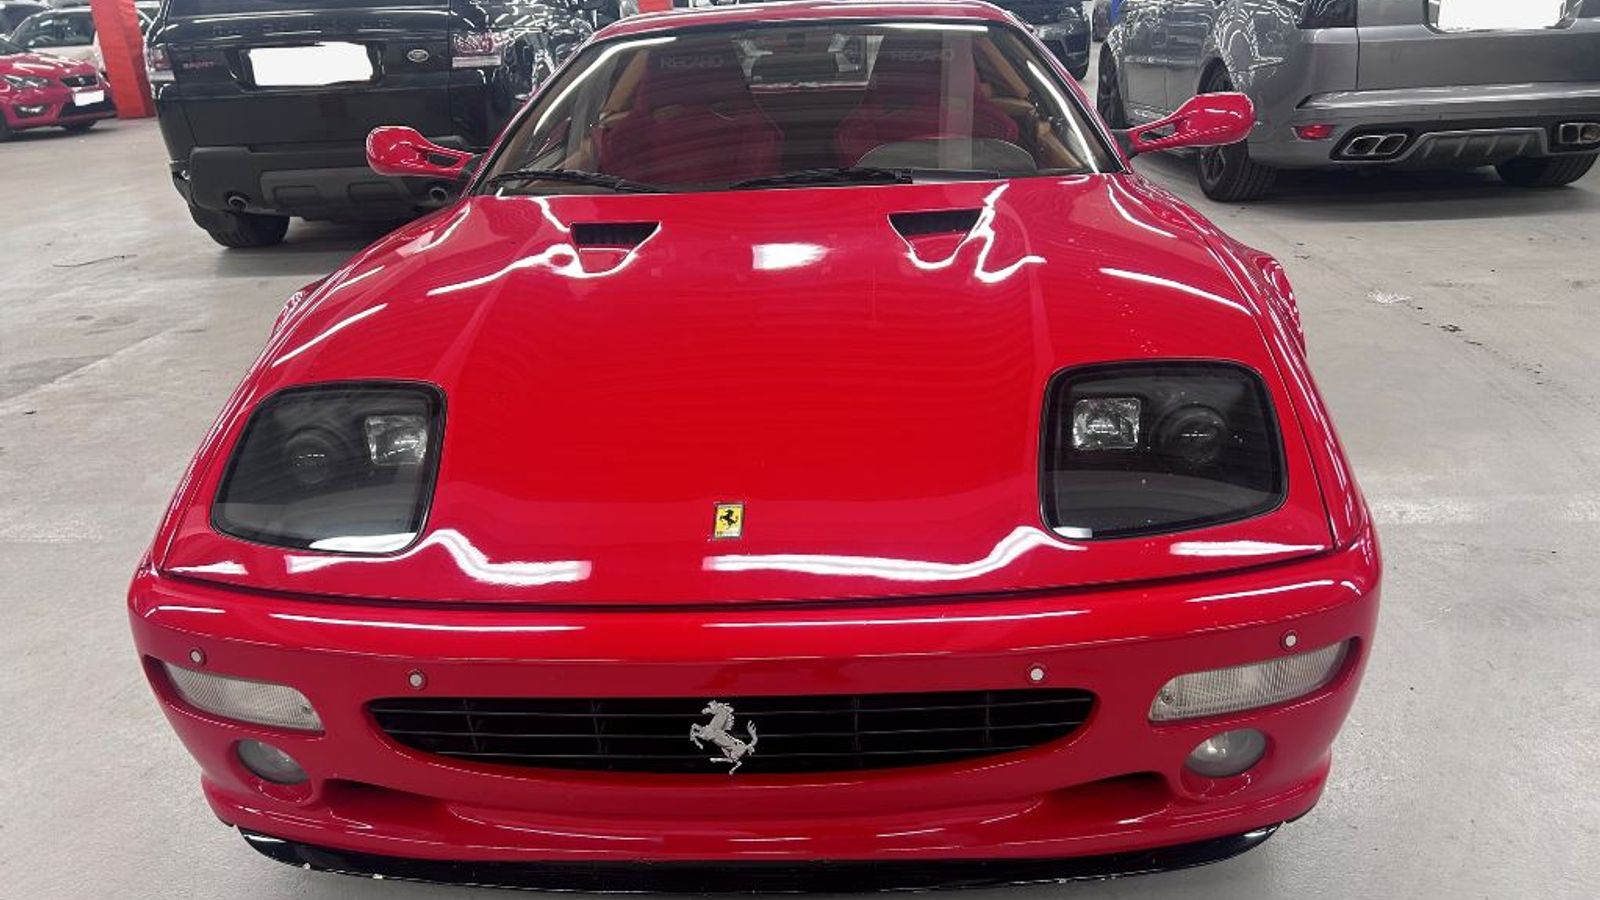 ferrari stolen from f1 driver in 1995 recovered by police nearly three decades later